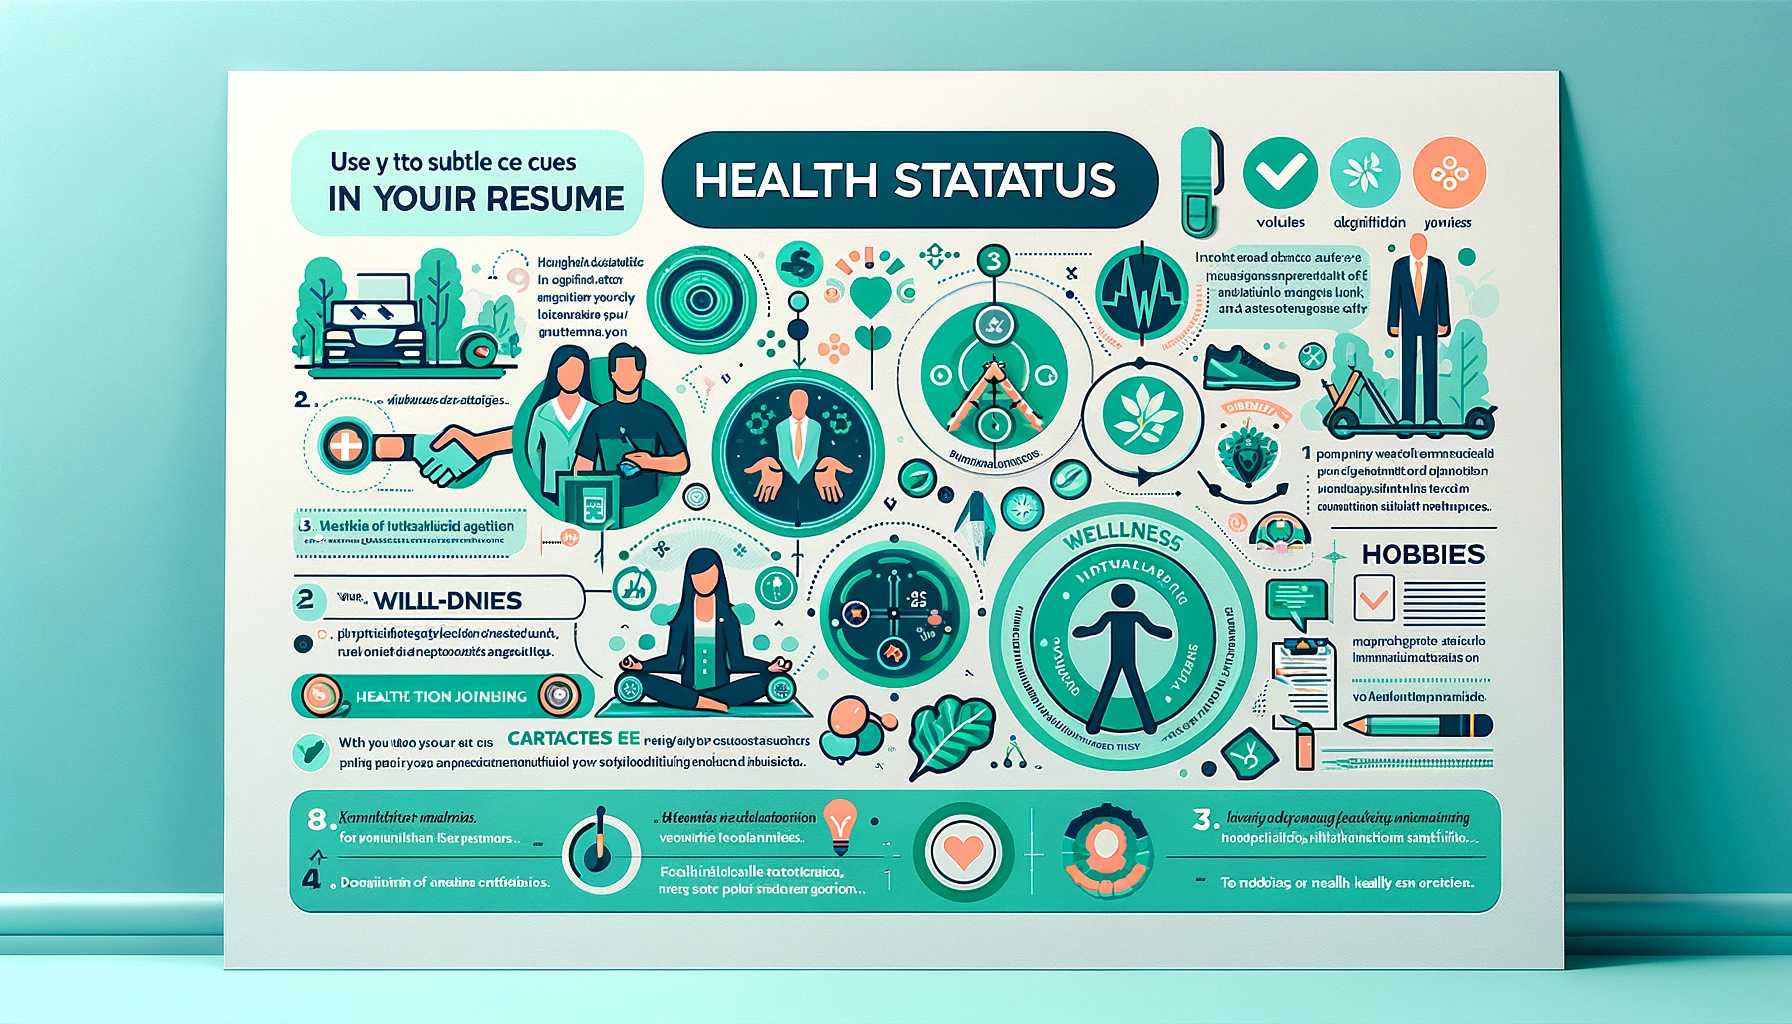 How to Indicate Health Status in Your Resume